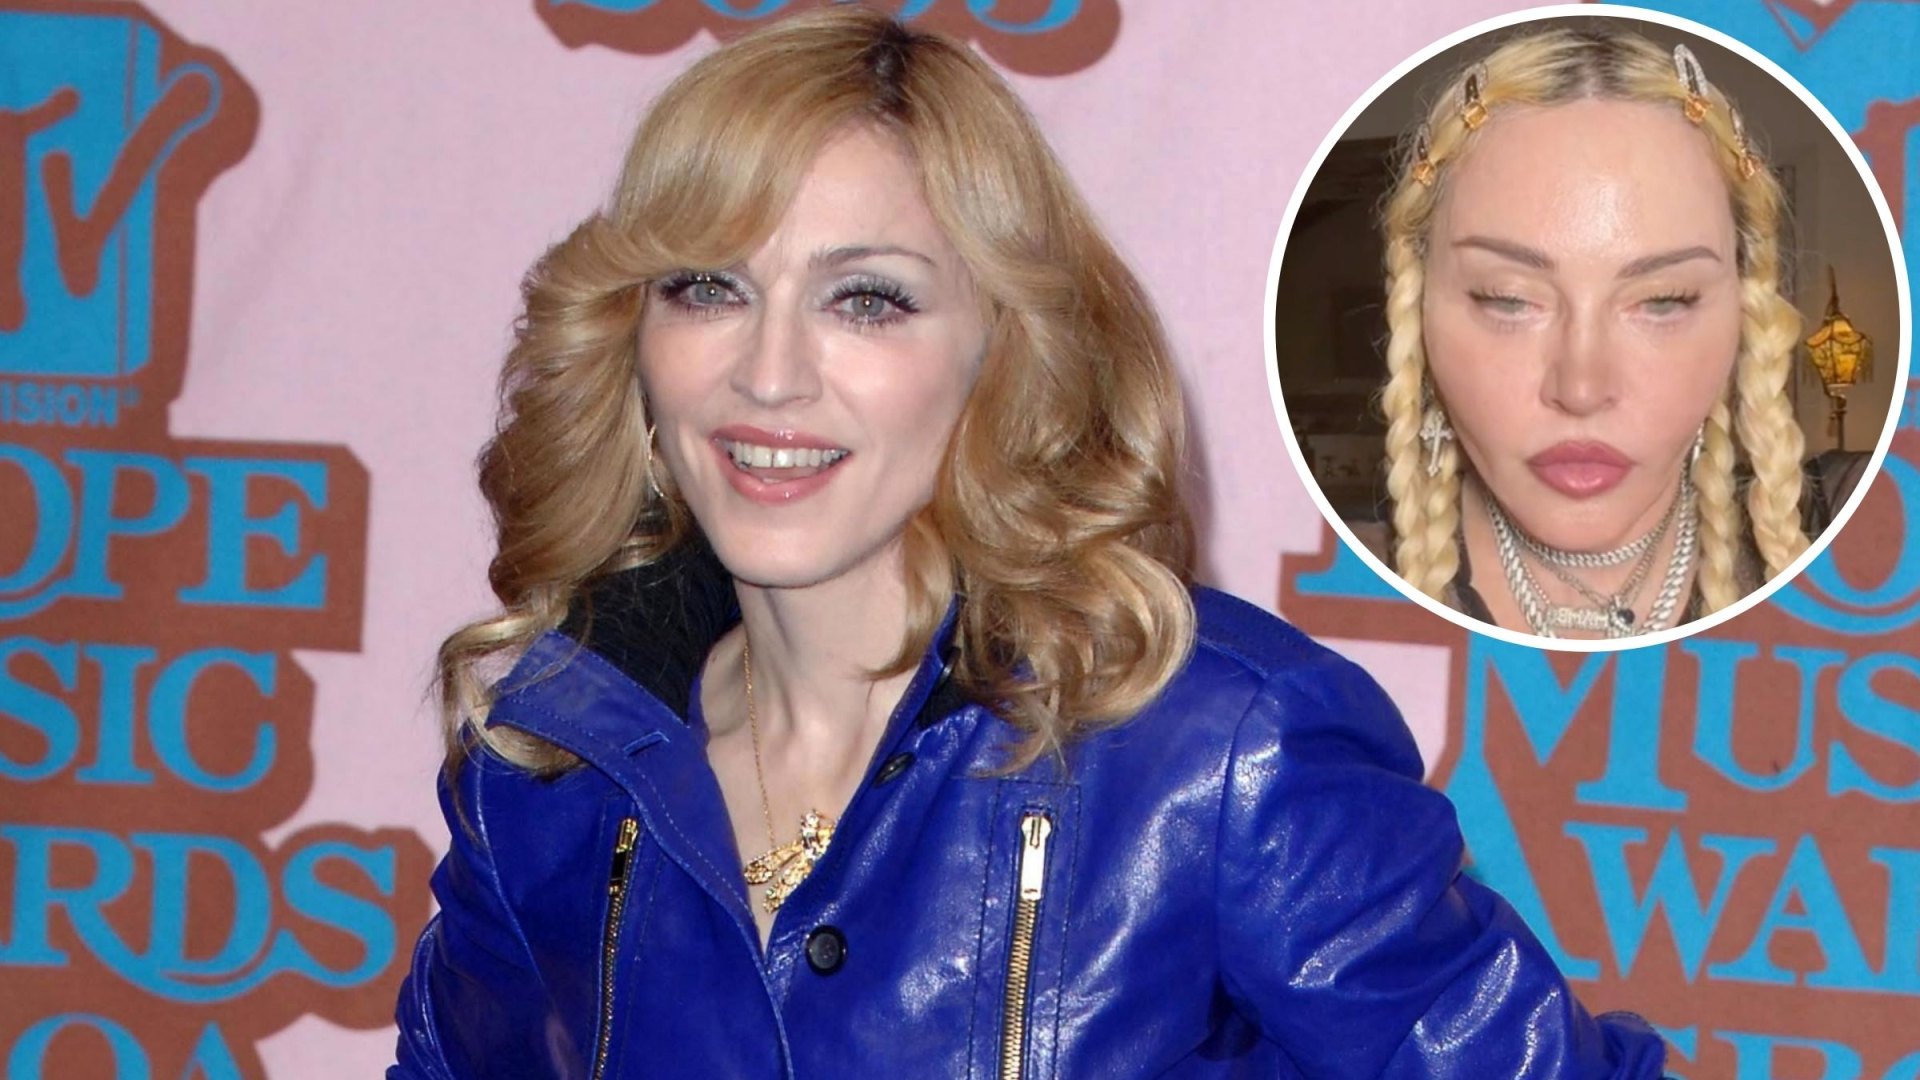 Madonna Transformation and Plastic Surgery Speculation Photos